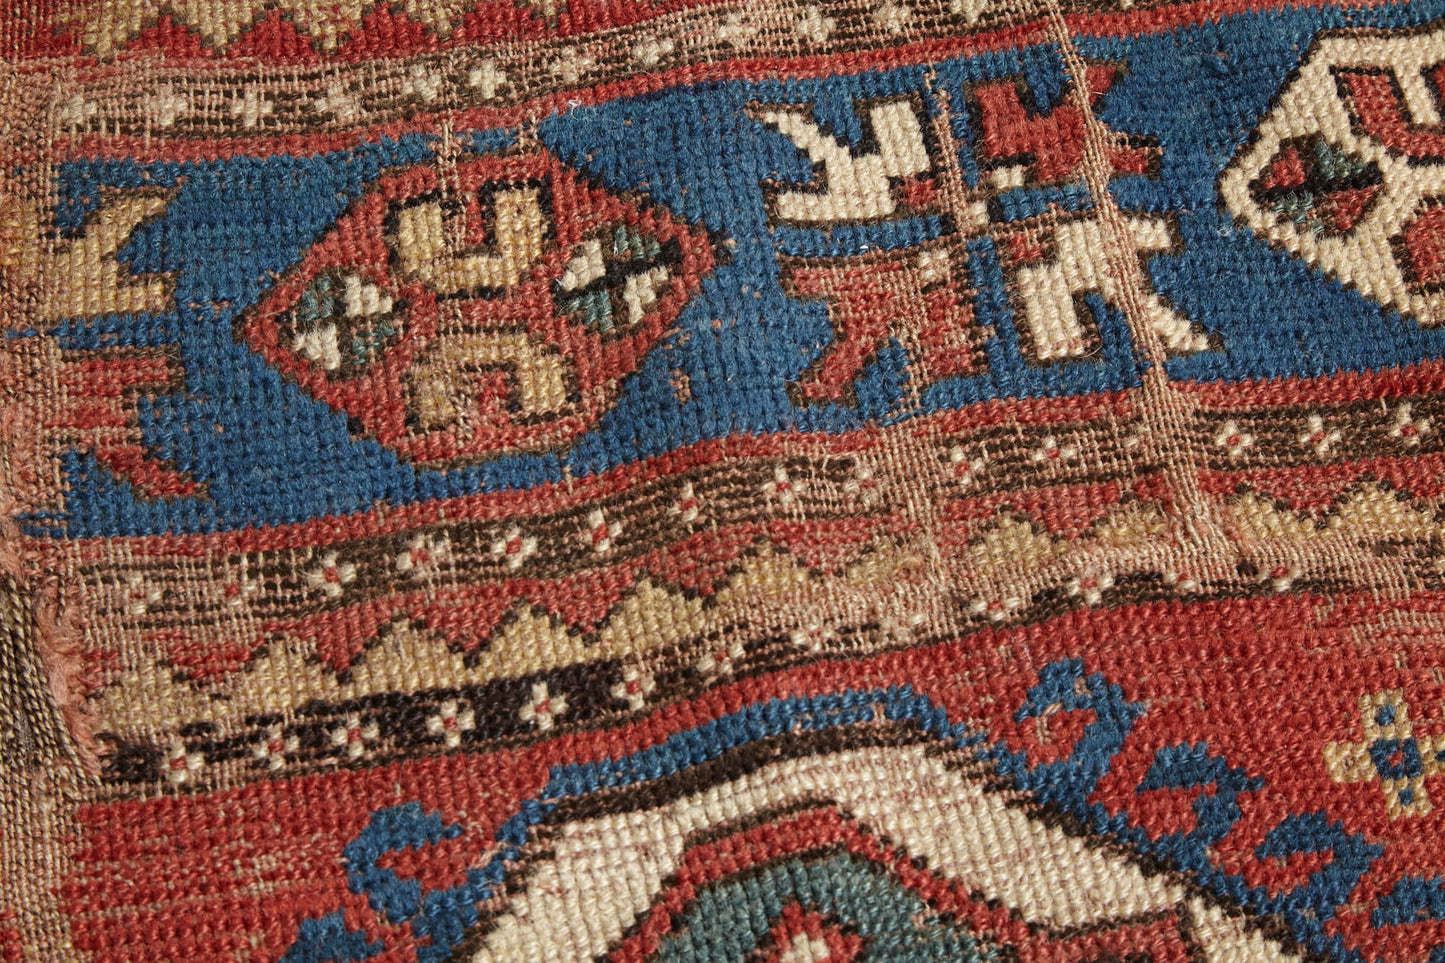 Beautifully worn antique Kazak Persian Rug with red, blue and cream colors - Available from King Kennedy Rugs Los Angeles